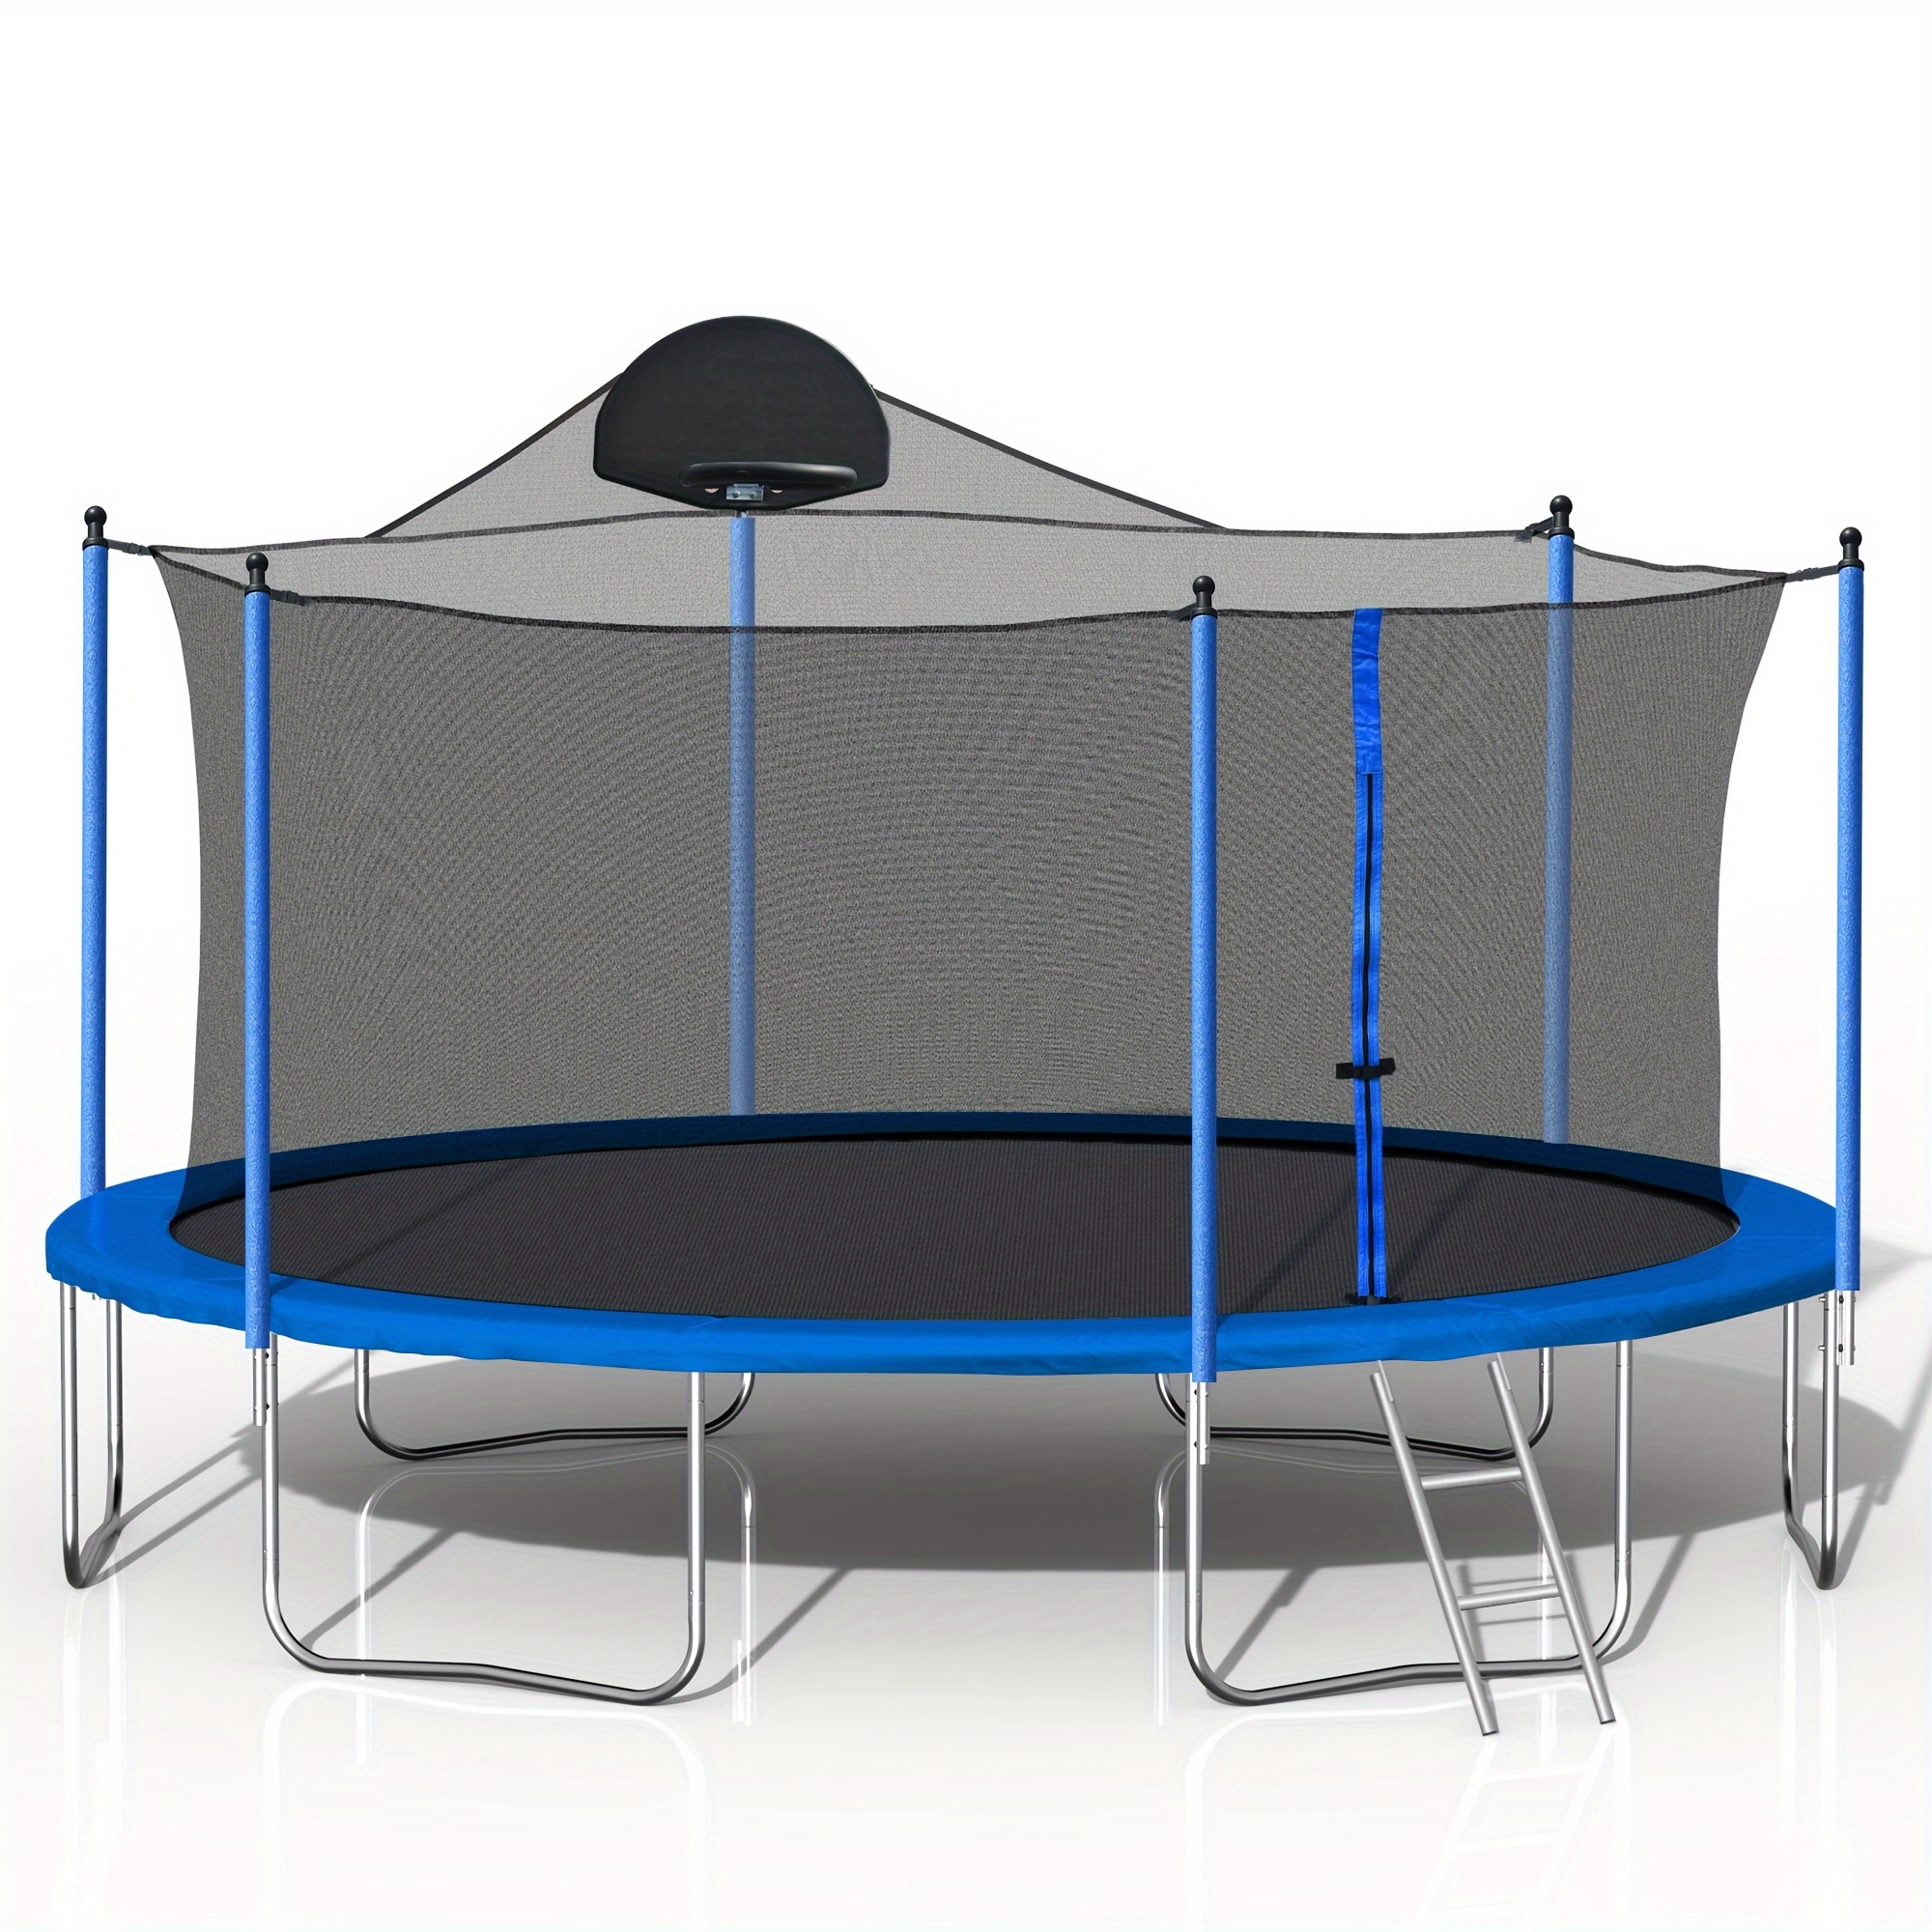 

Highsound Trampoline, 14 Ft Trampoline With Safety Enclosure Net, Basketball Hoop And Ladder, Heavy Duty Outdoor Recreational Trampolines For Family, Easy Assembly, Blue